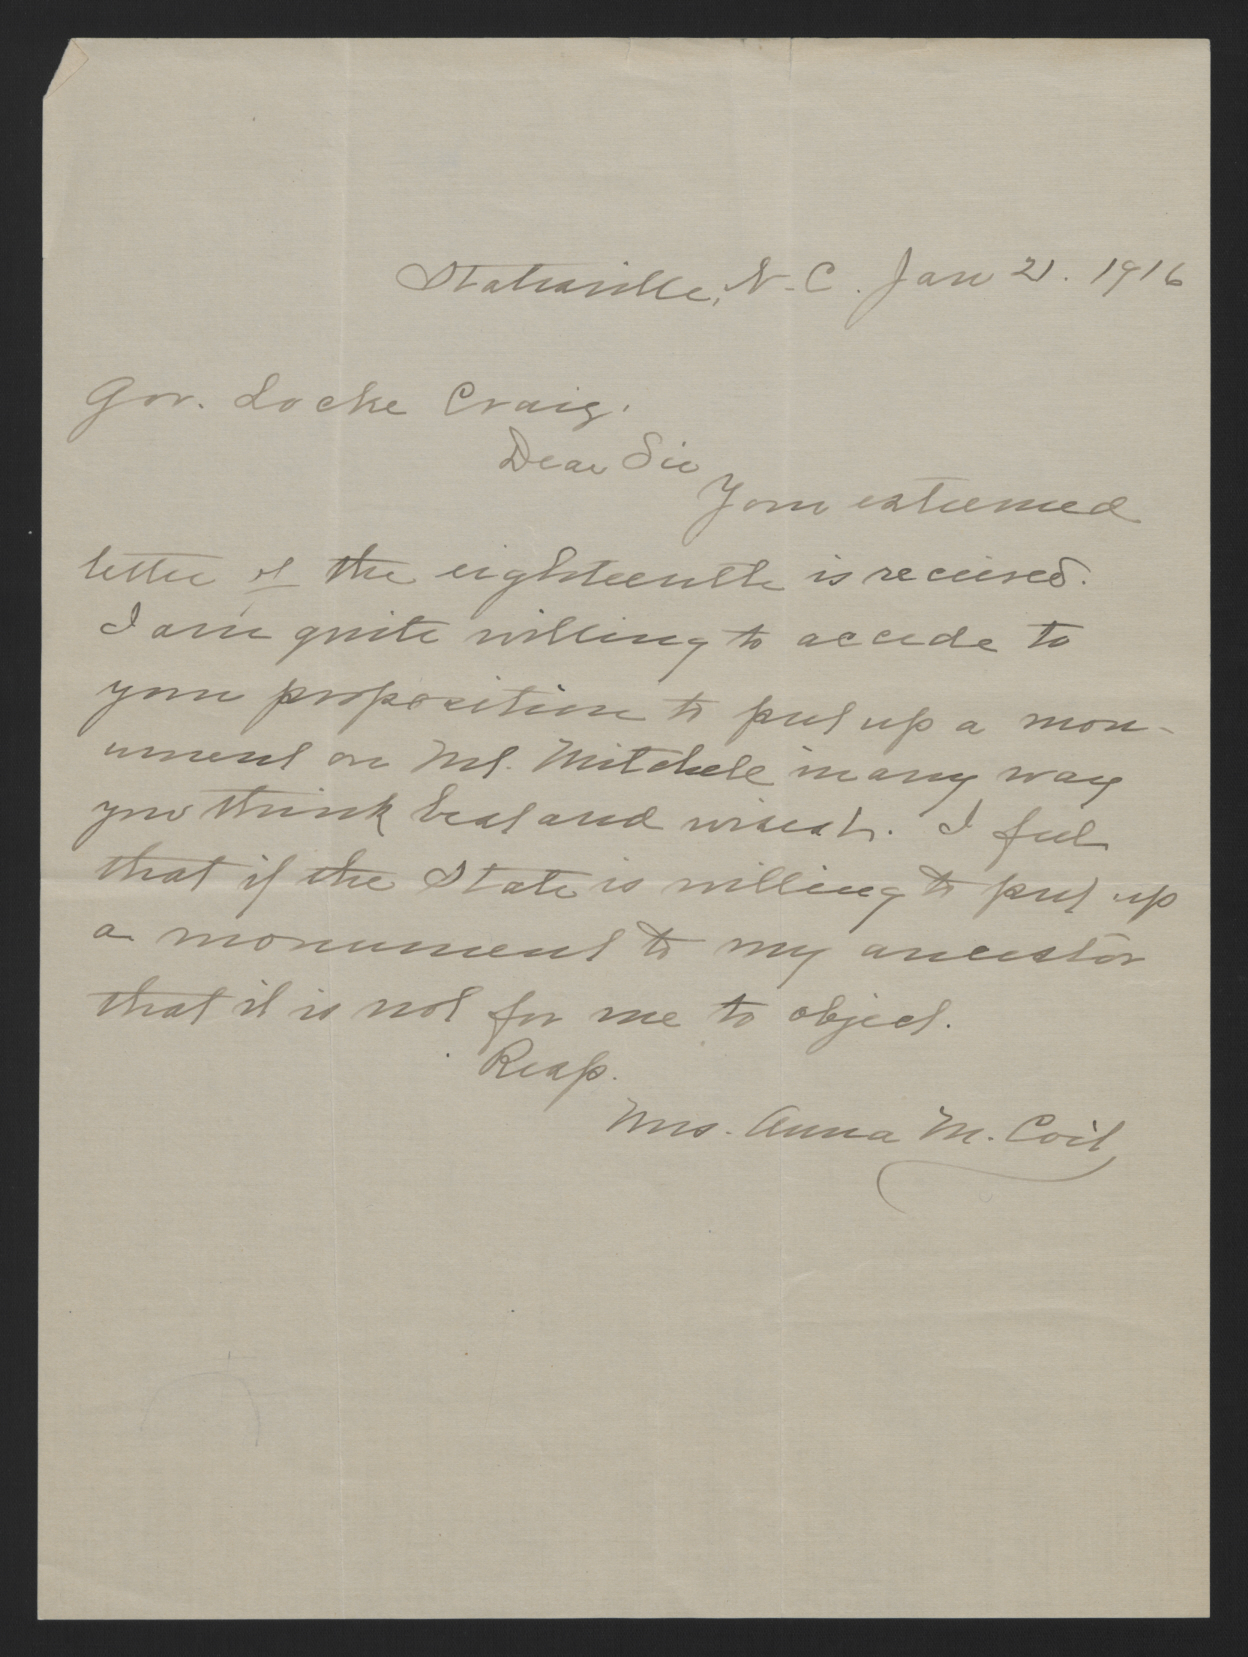 Letter from Coit to Craig, January 21, 1916